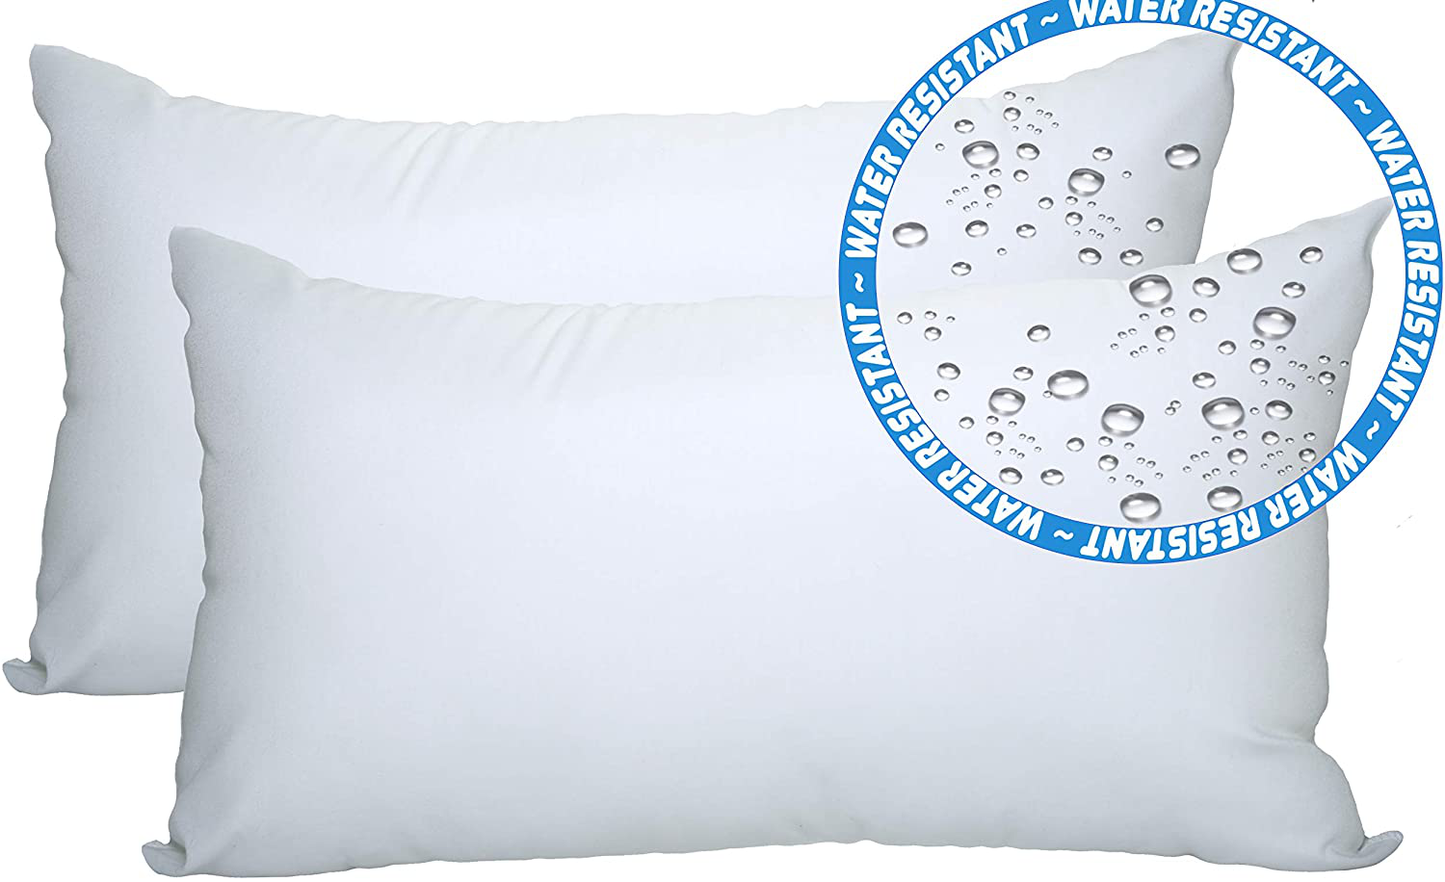 Foamily Outdoor Pillows for Patio Furniture (Set of 2-12 x 20) Water Resistant Throw Pillow Insert Made in USA